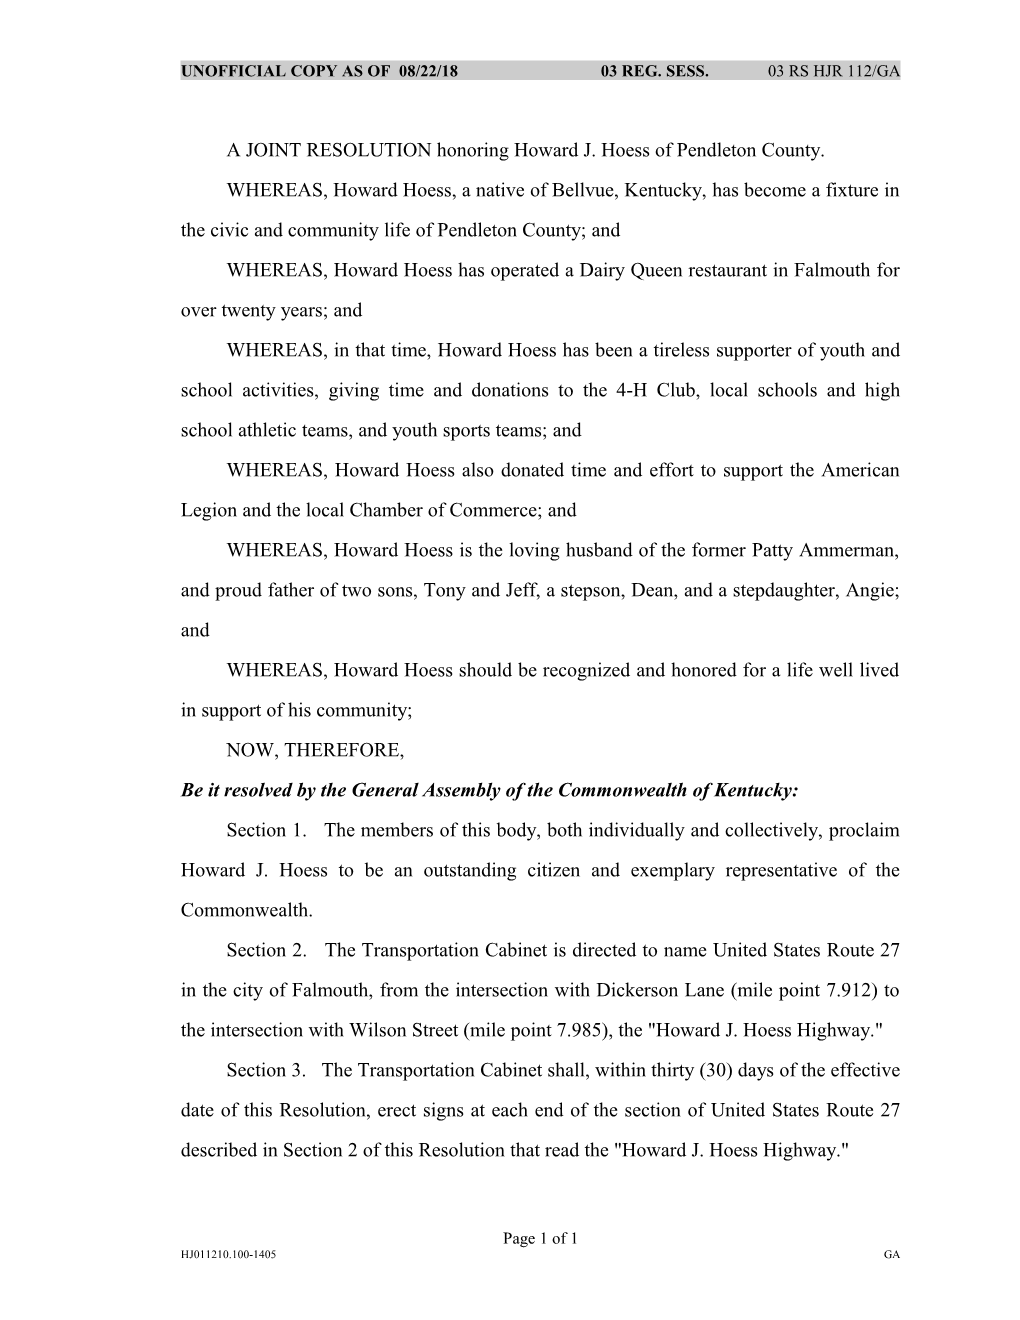 A JOINT RESOLUTION Honoring Howard J. Hoess of Pendleton County